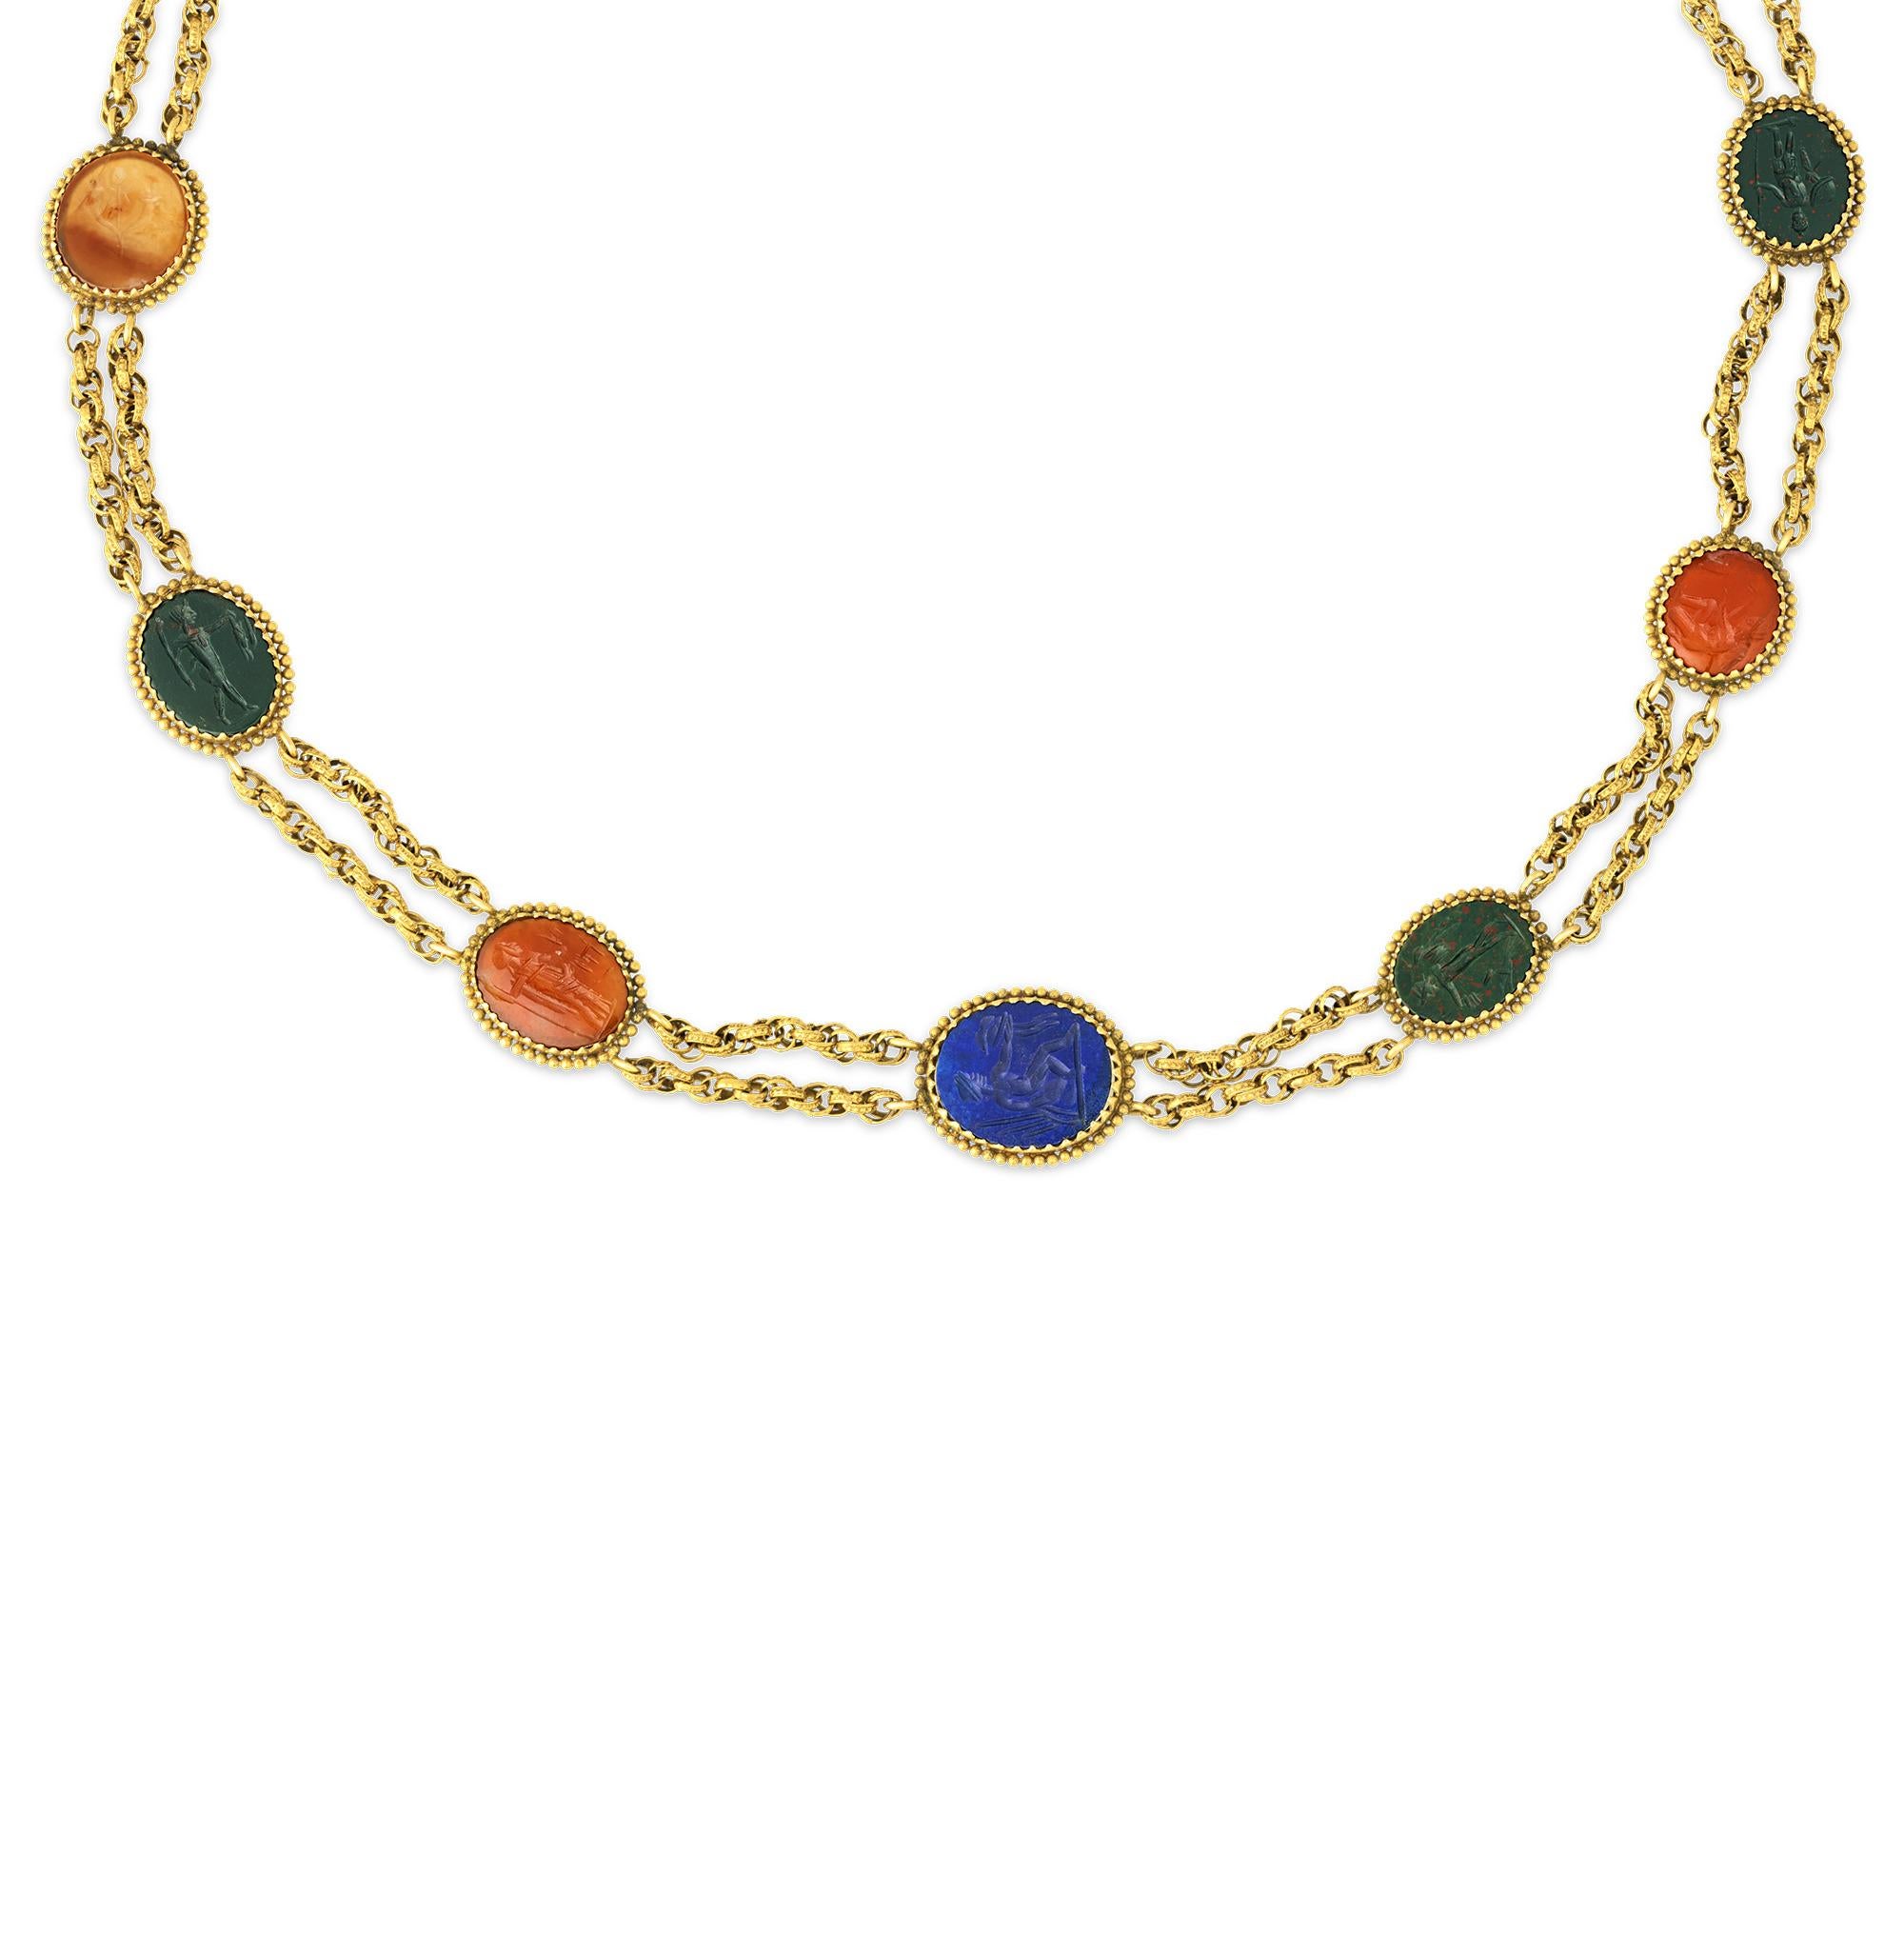 Eleven exceptionally rare carved gemstones are featured in this museum-quality Victorian necklace and the majority of the intaglio gems date to ancient Rome. Also known as gem carving, the art of intaglio dates to as early as the 14th century B.C.E.